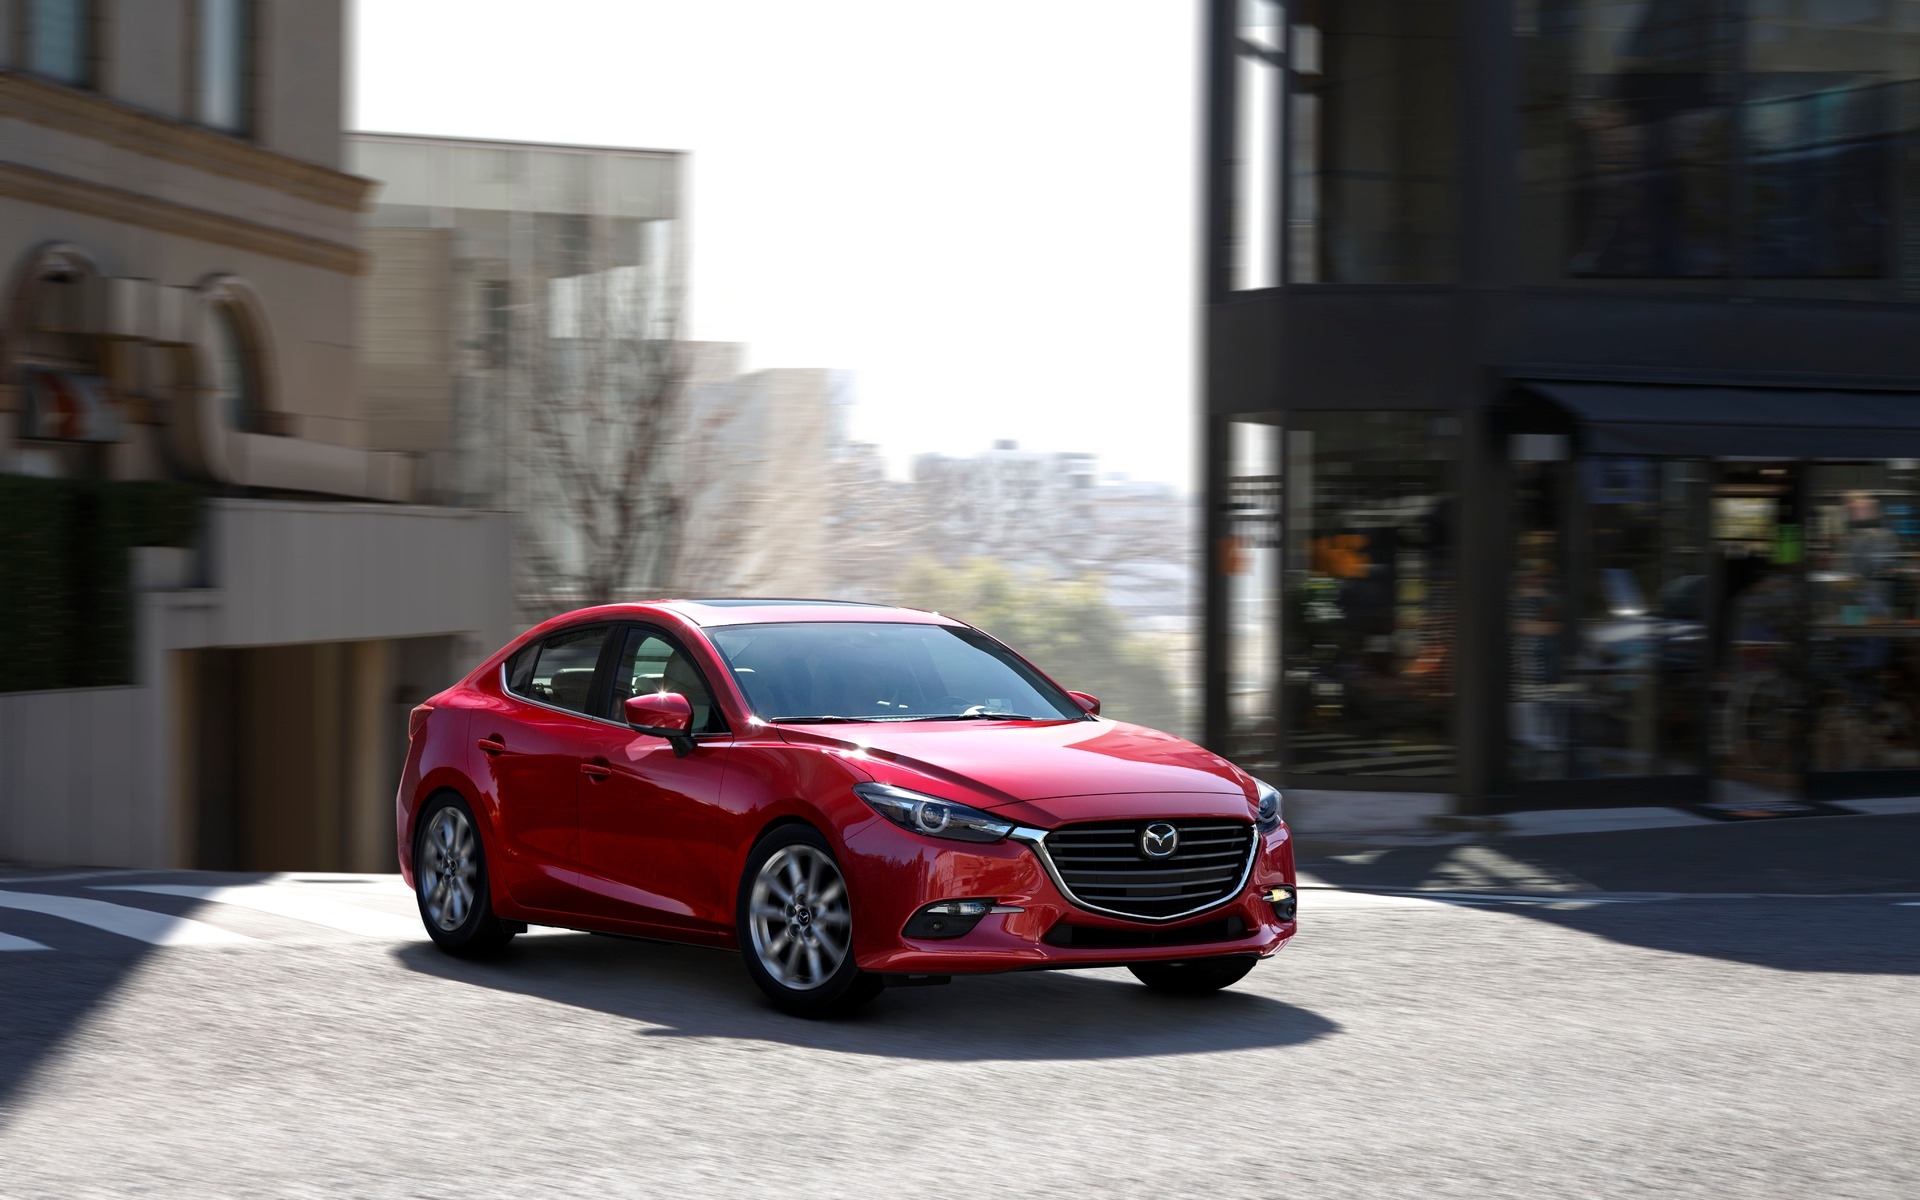 ARTICLE-OCCASION-BEAUCAGE-MEILLEURE-AUTO-USAGEE-PAS-CHERE-mazda3